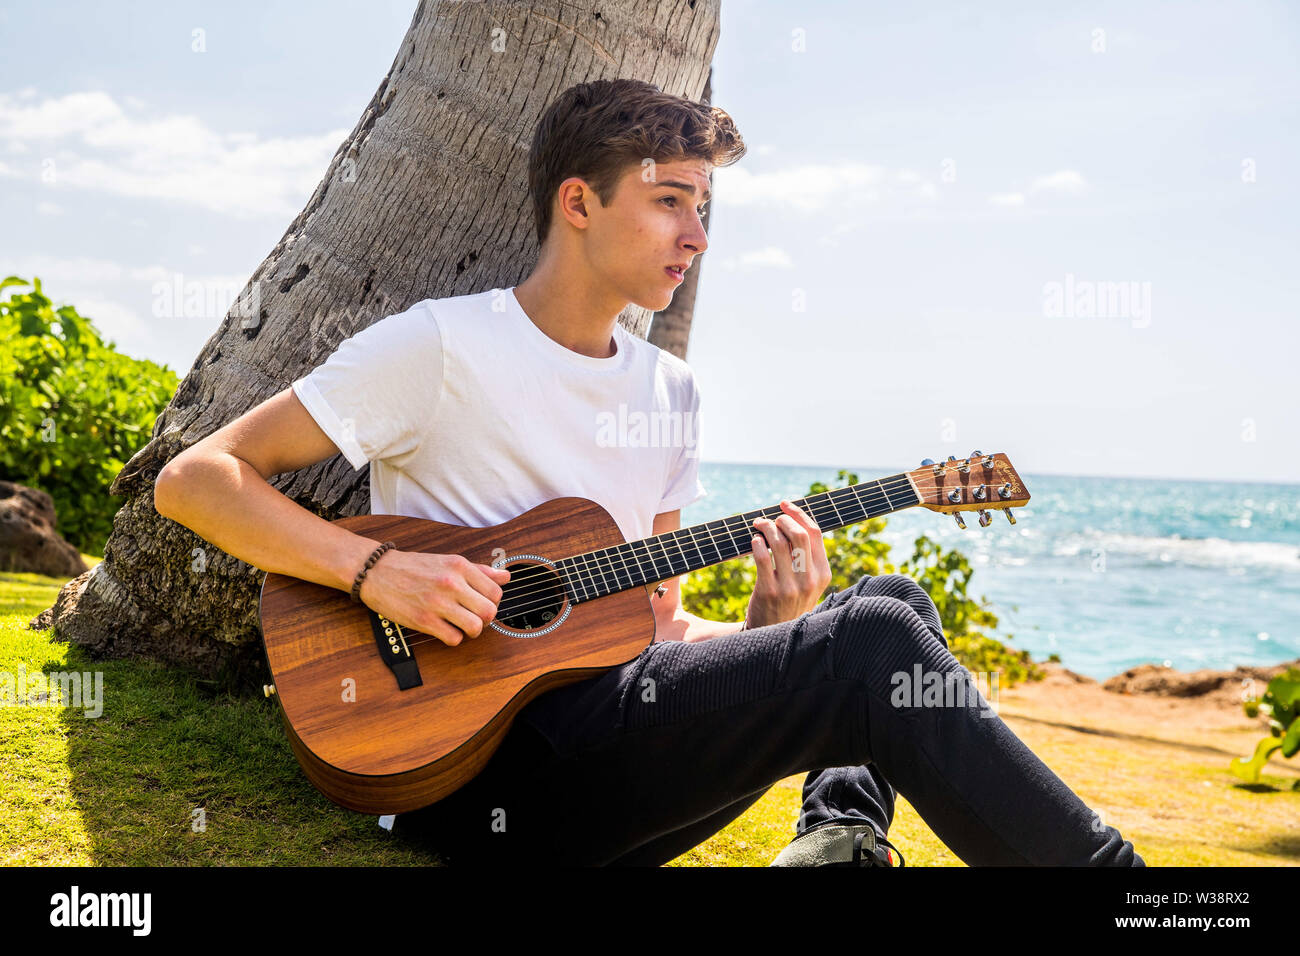 June 14, 2019 - Ko Olina, Hawaii, U.S - COBY JAMES promotional photo shoot in Ko Lina, Hawaii.   Coby James Martin is a Christian Singer Songwriter embarking on his first US Tour supporting Christian Artist Danny Gokey. (Credit Image: © Andy Martin Jr./ZUMA Wire) Stock Photo